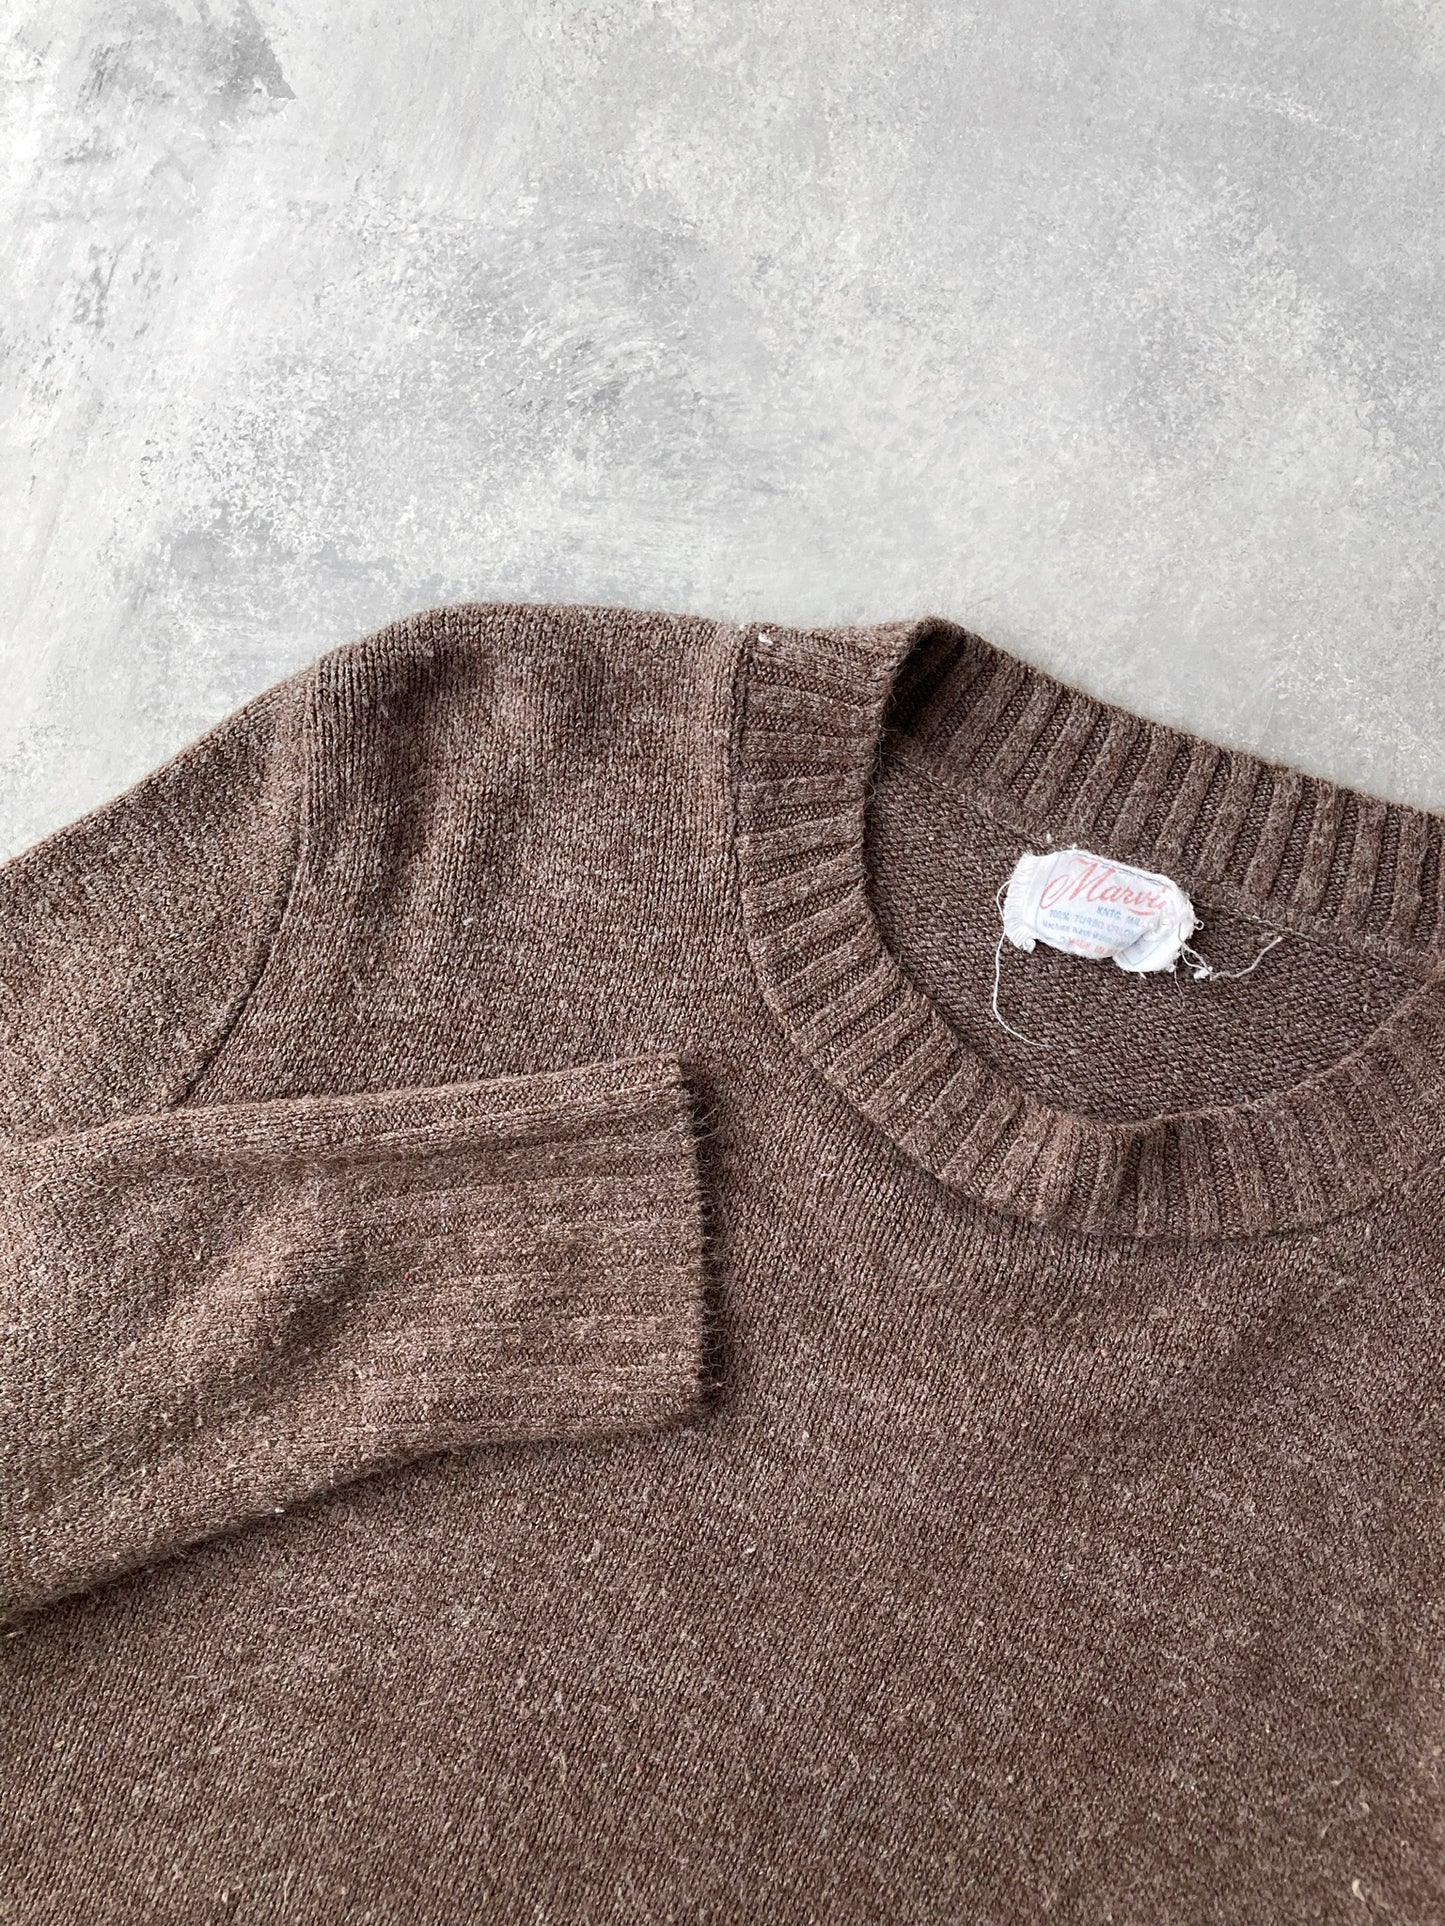 Marled Brown Sweater 70's - Small